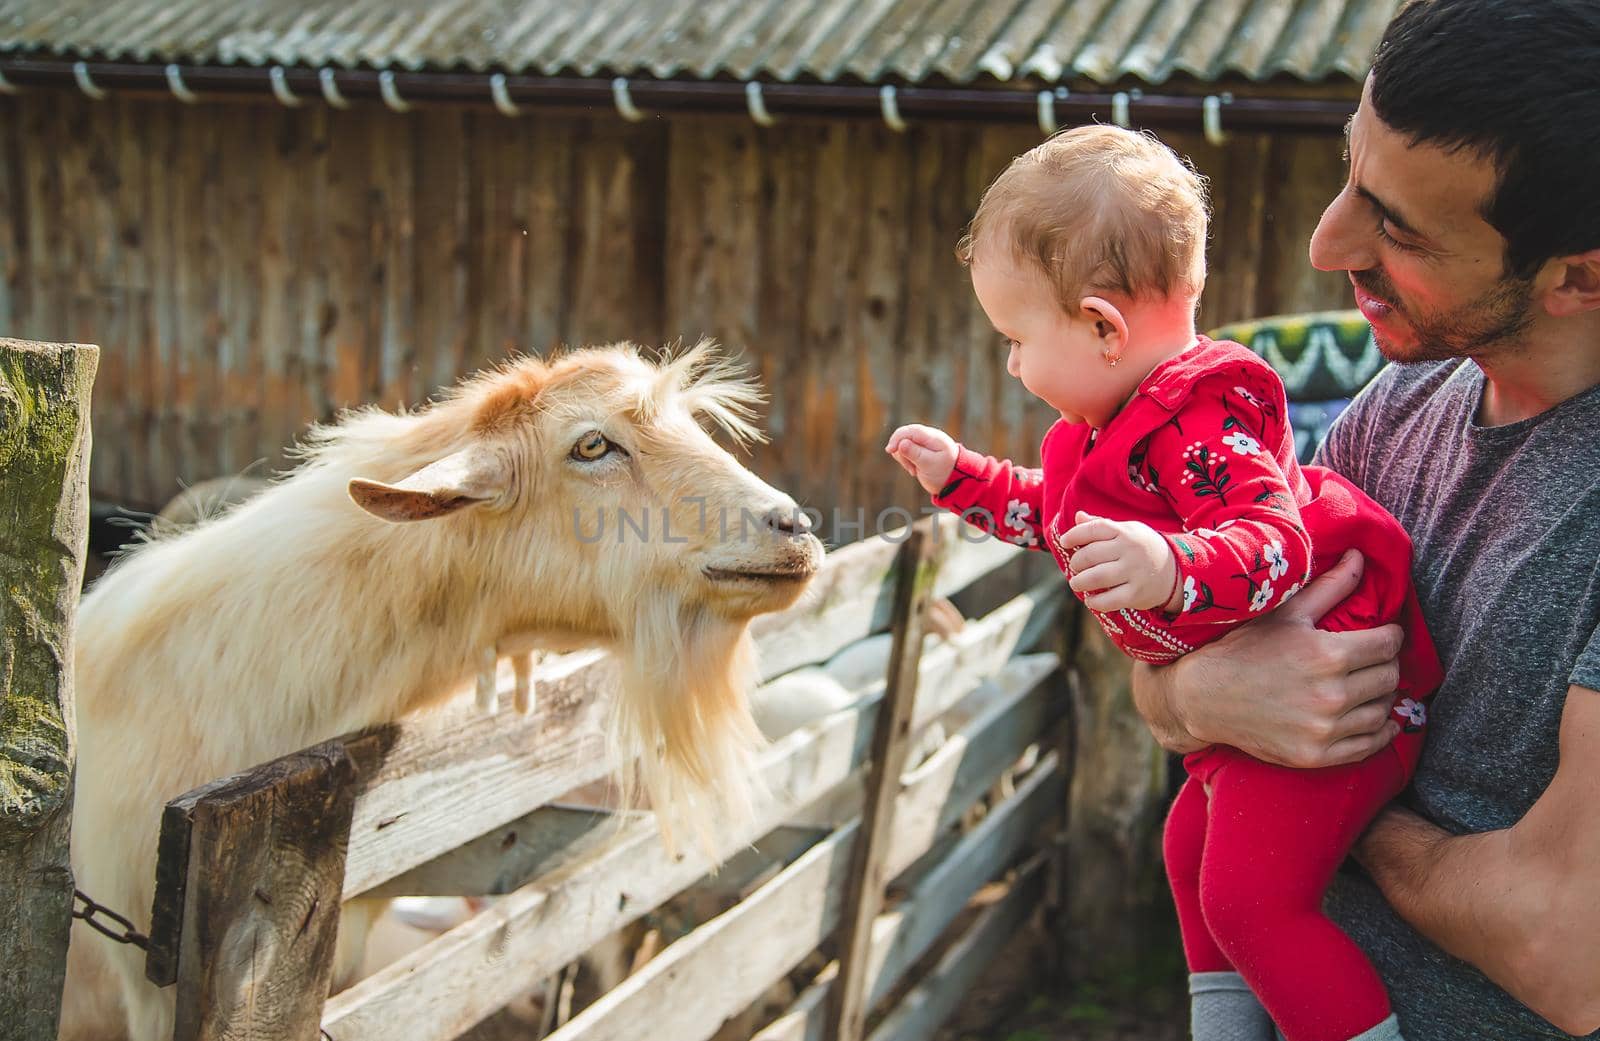 Baby petting a goat on the farm. Selective focus. Nature.